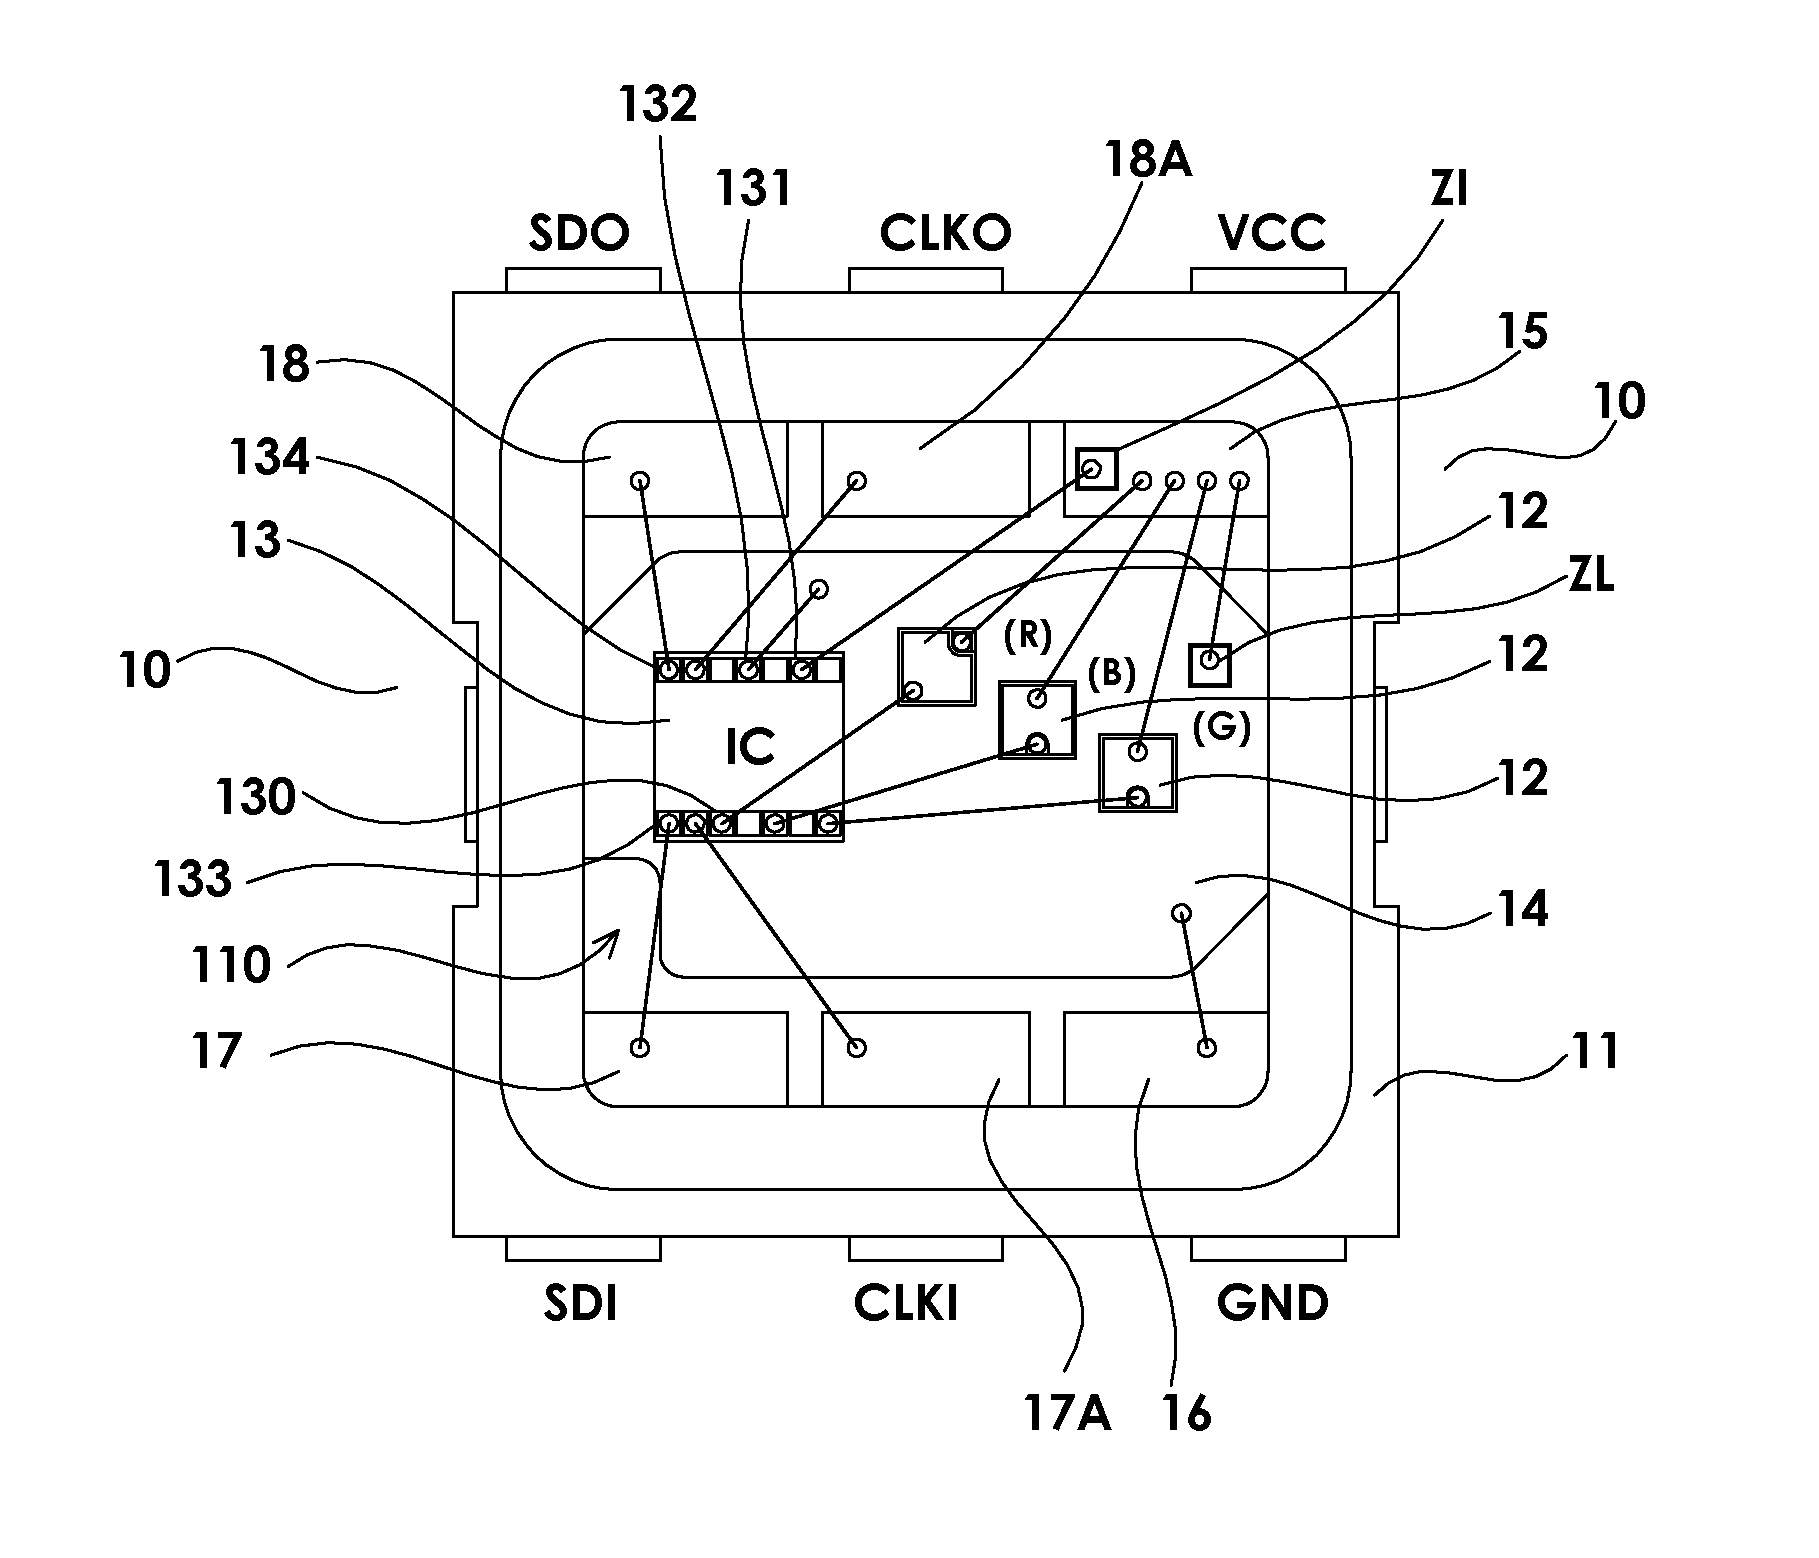 LED module packaging structure with an IC chip